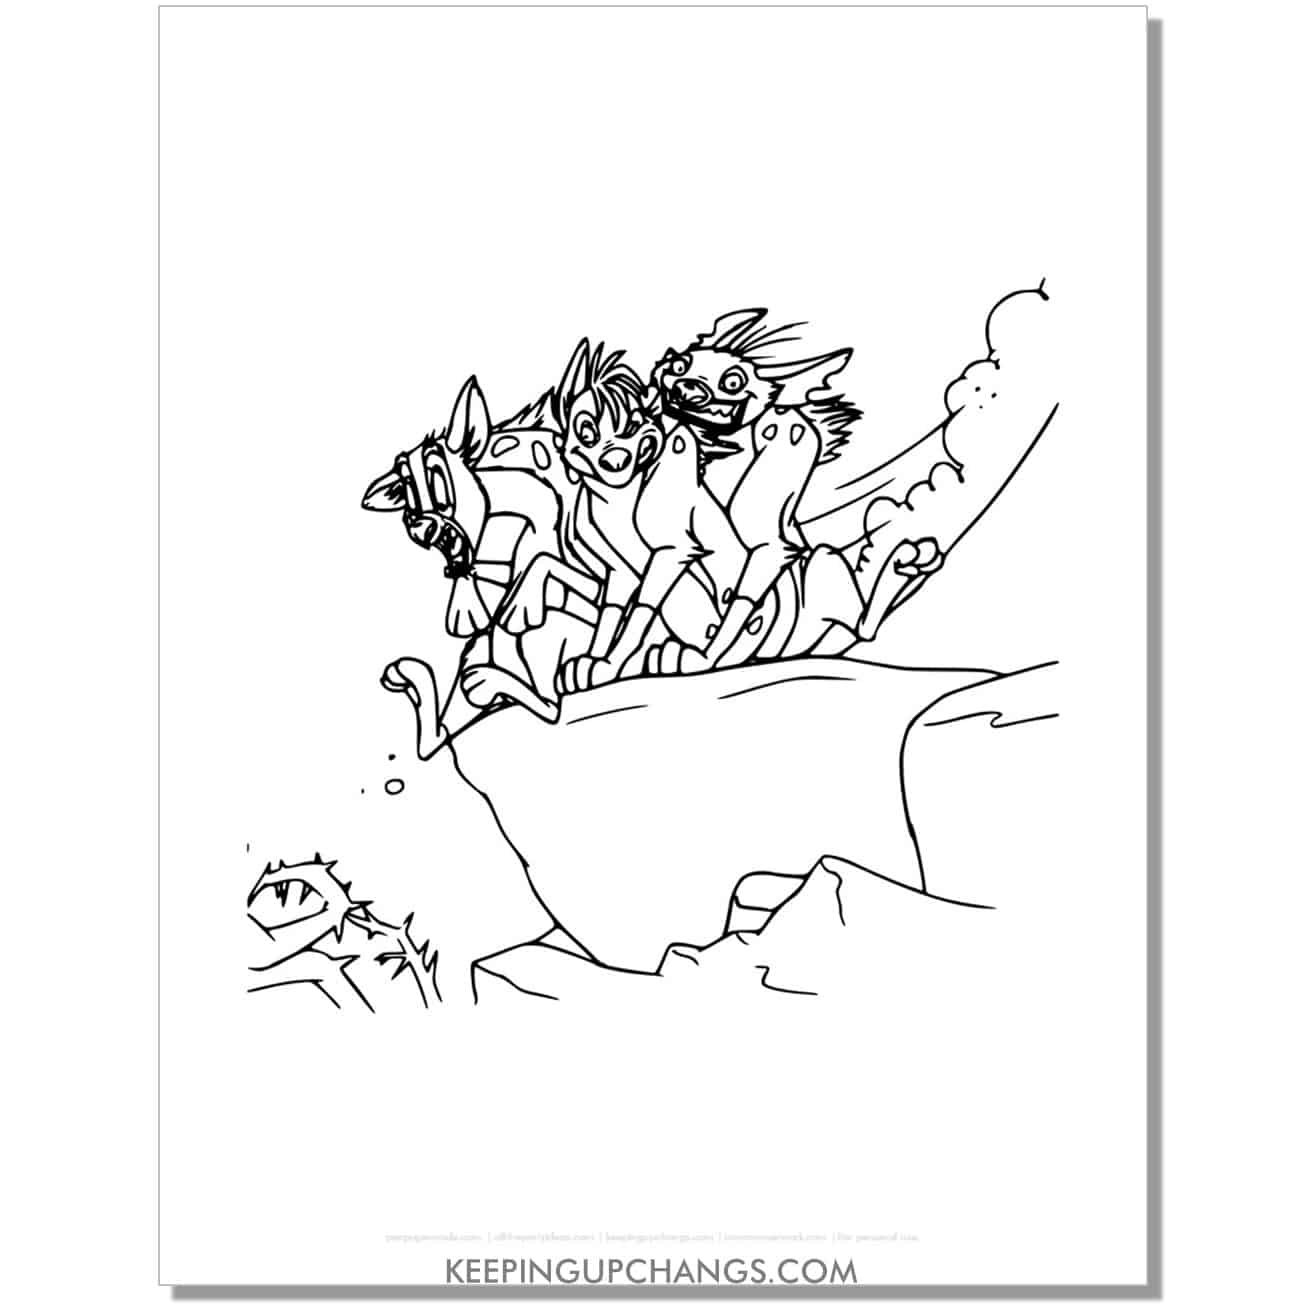 mischievous hyenas lion king coloring page, sheet.